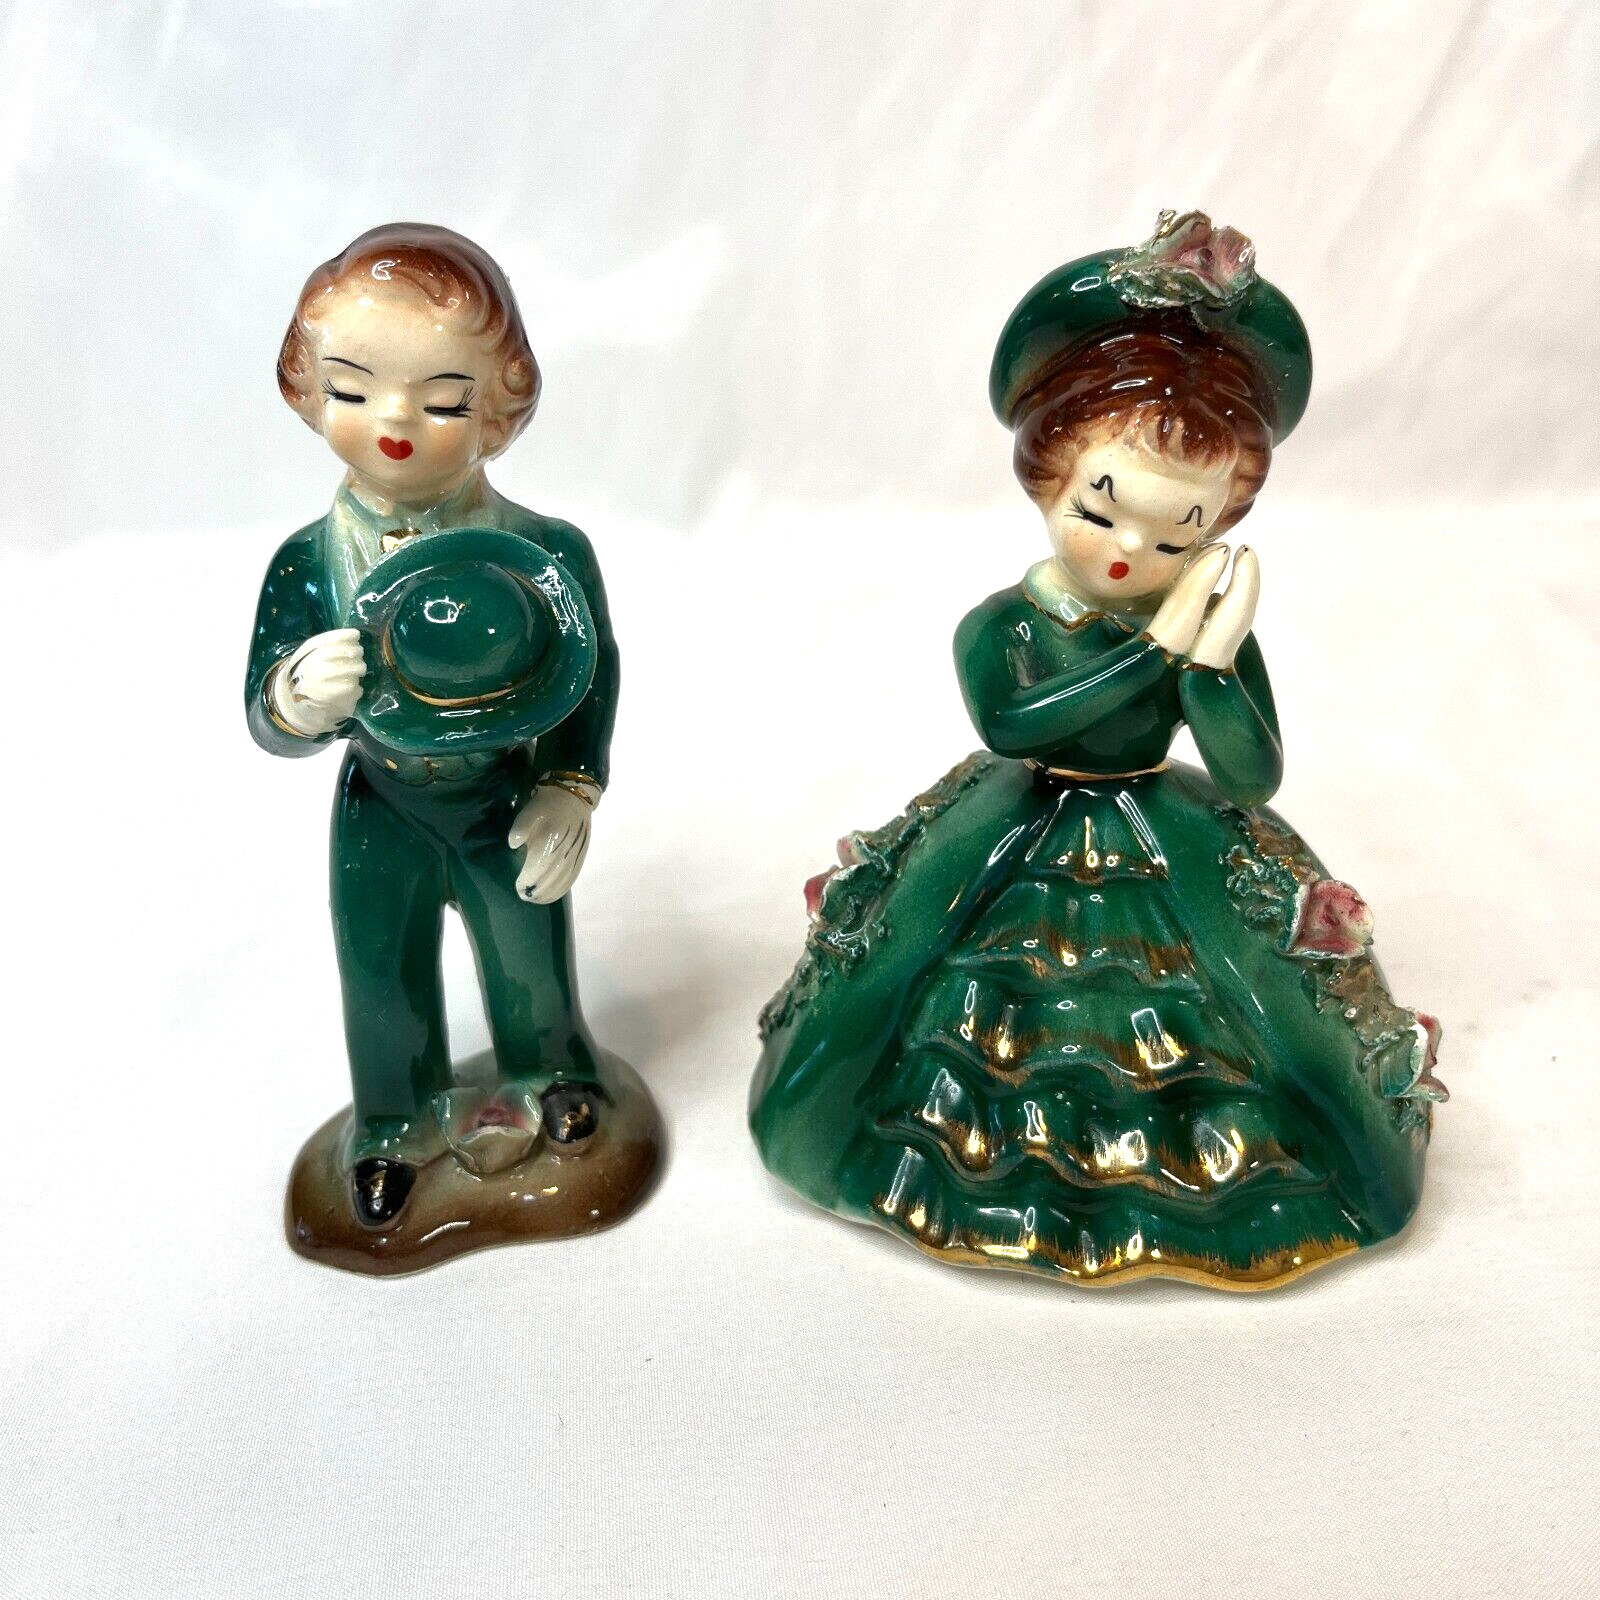 Vintage Made In Japan couple Wearing Green Dress With Spaghetti Trim Figurines